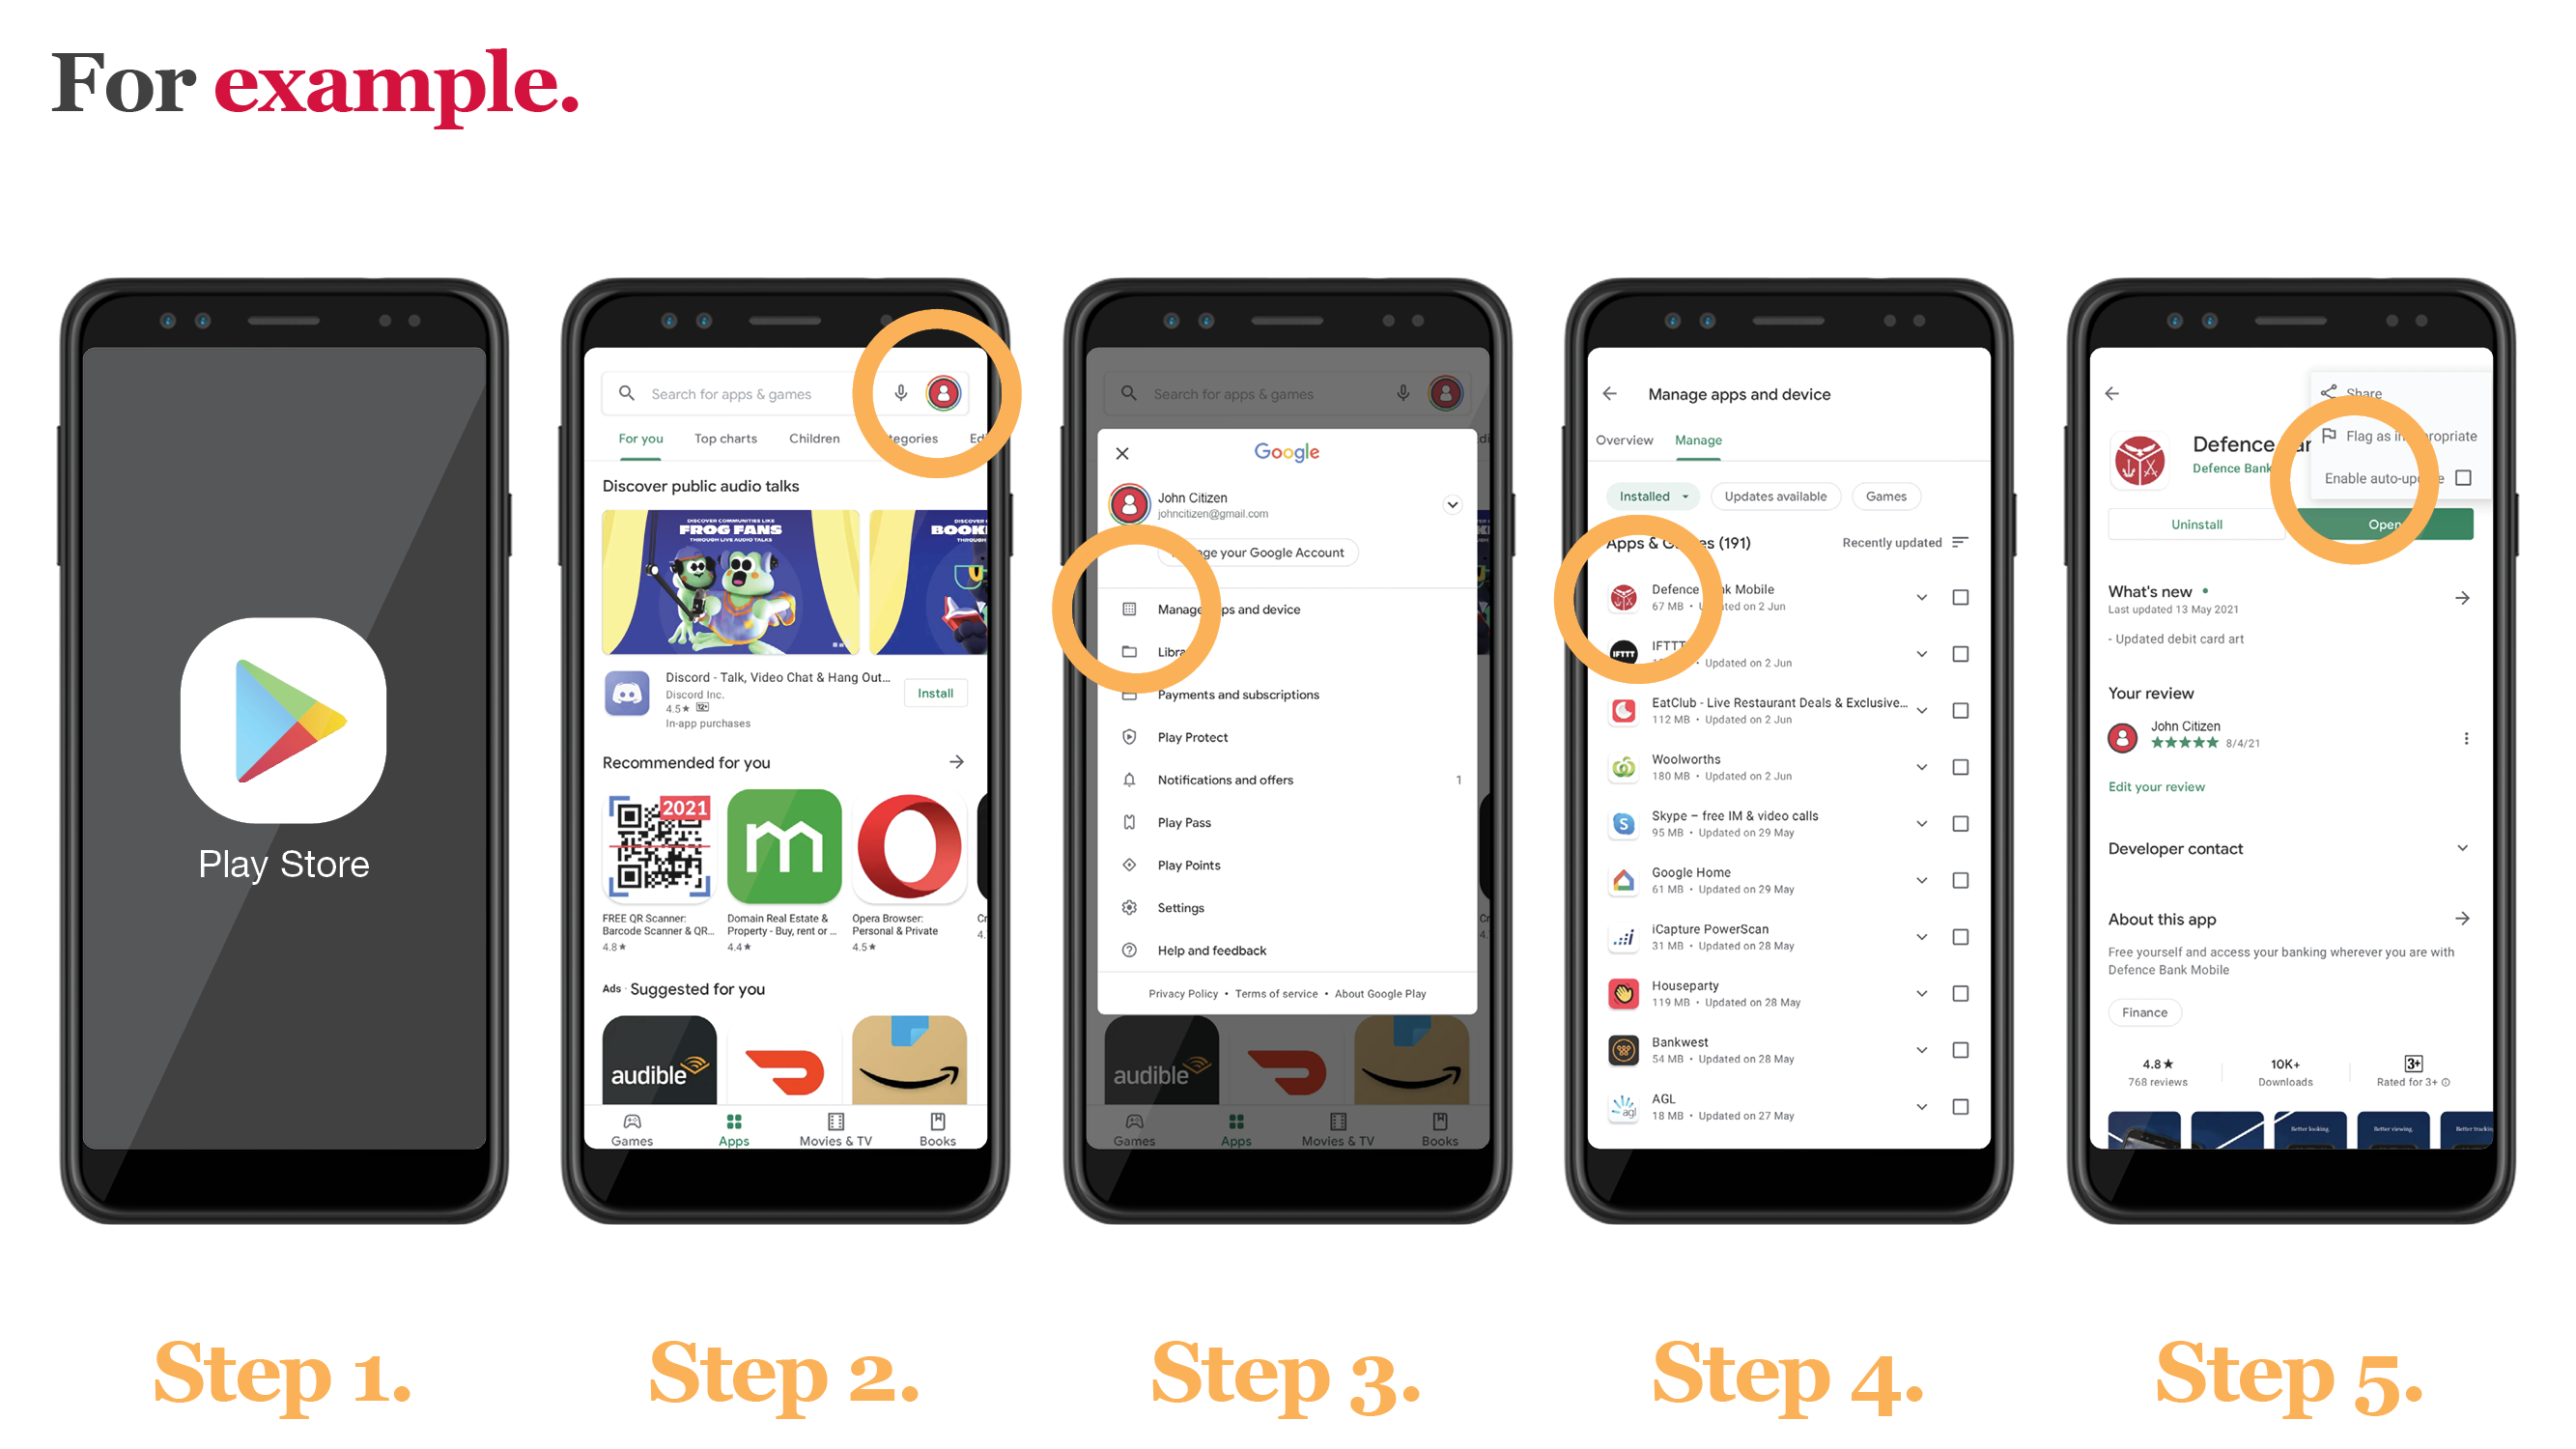 For example: Step 1. Open the Google Play Store app. Step 2. At the top right, tap the profile icon. Step 3. Tap Manage apps & device. Step 4. Select Manage and choose the app you want to update. Step 5. Tap the three dots stacked vertically in the top right-hand corner and choose Enable auto-update.